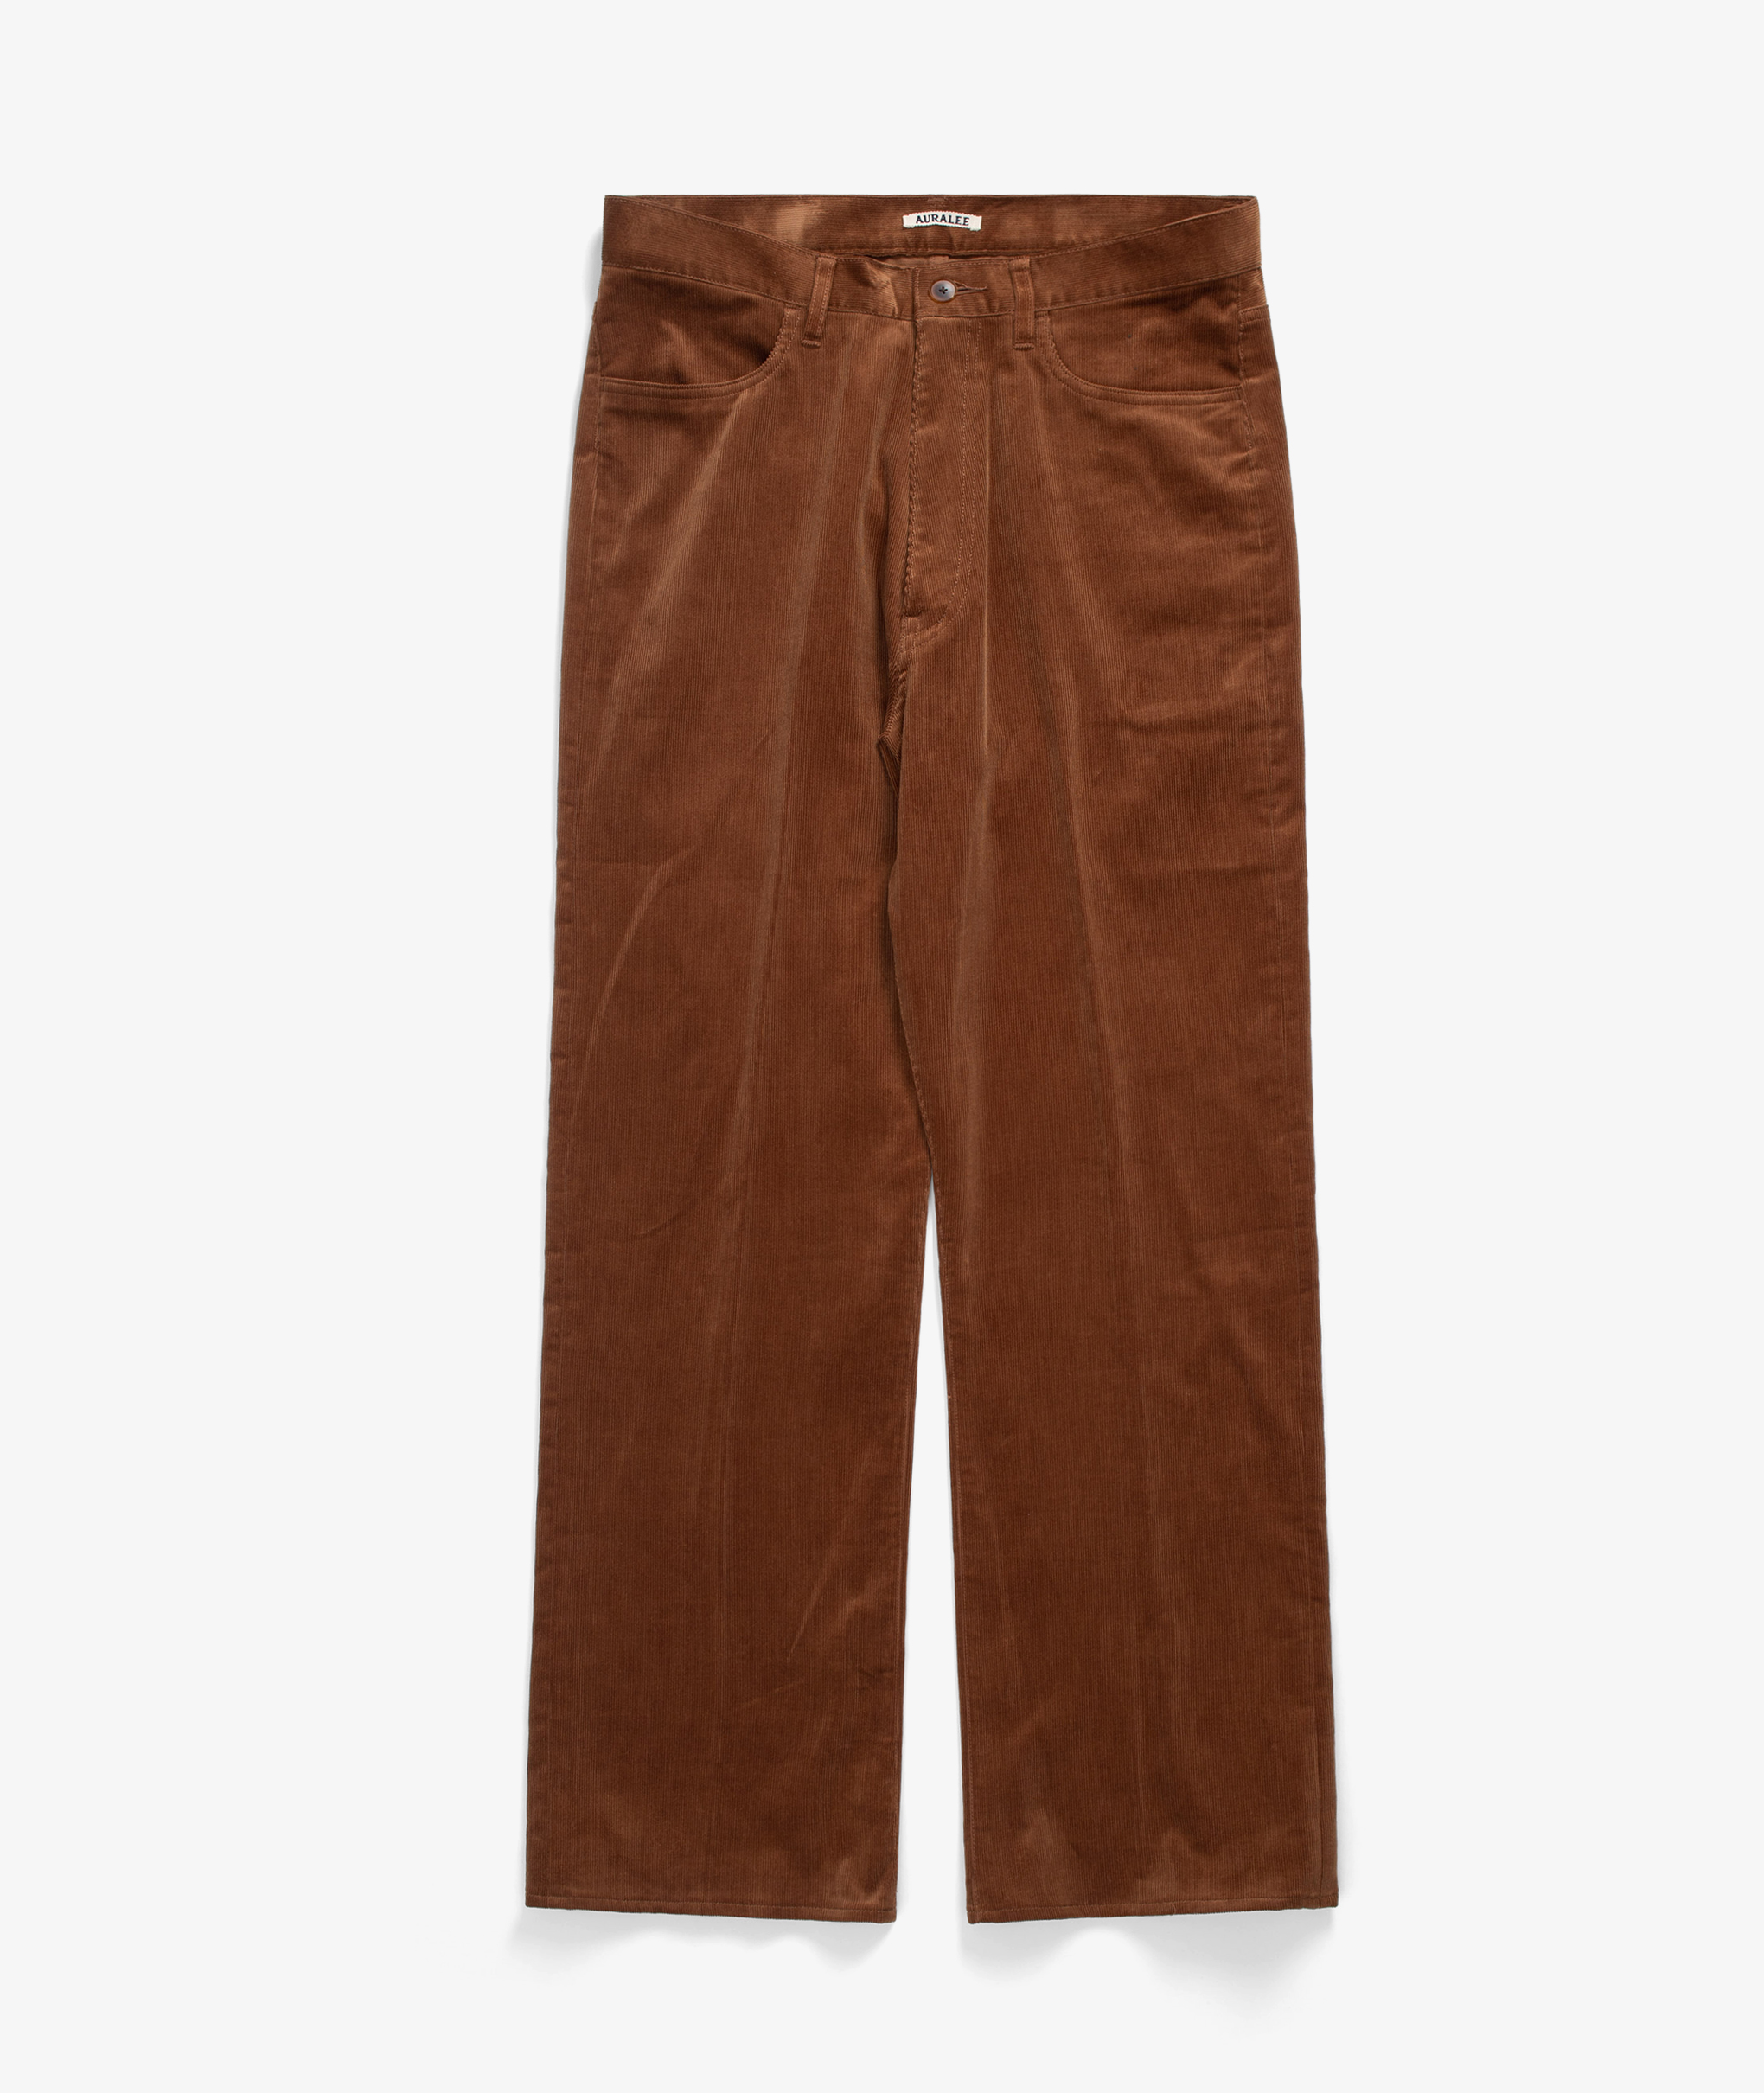 Norse Store | Shipping Worldwide - Auralee Finx Corduroy Pants 